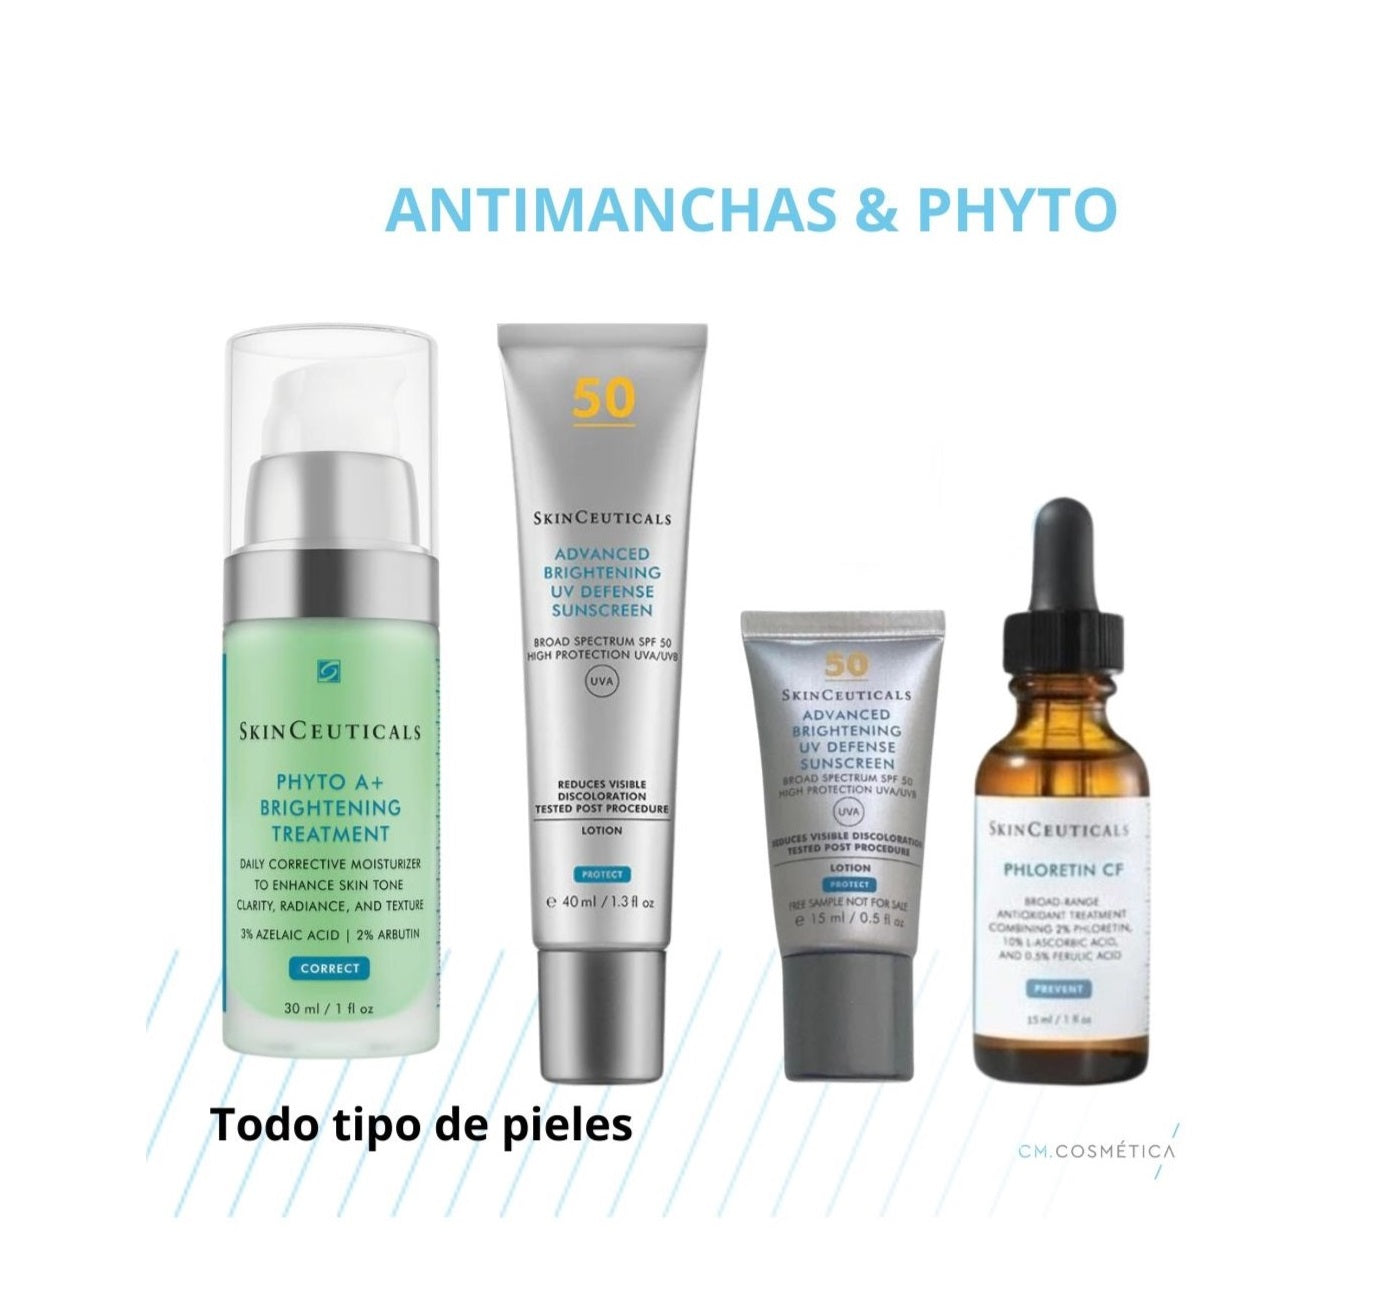 Skinceuticals Pack Antimanchas & Phyto